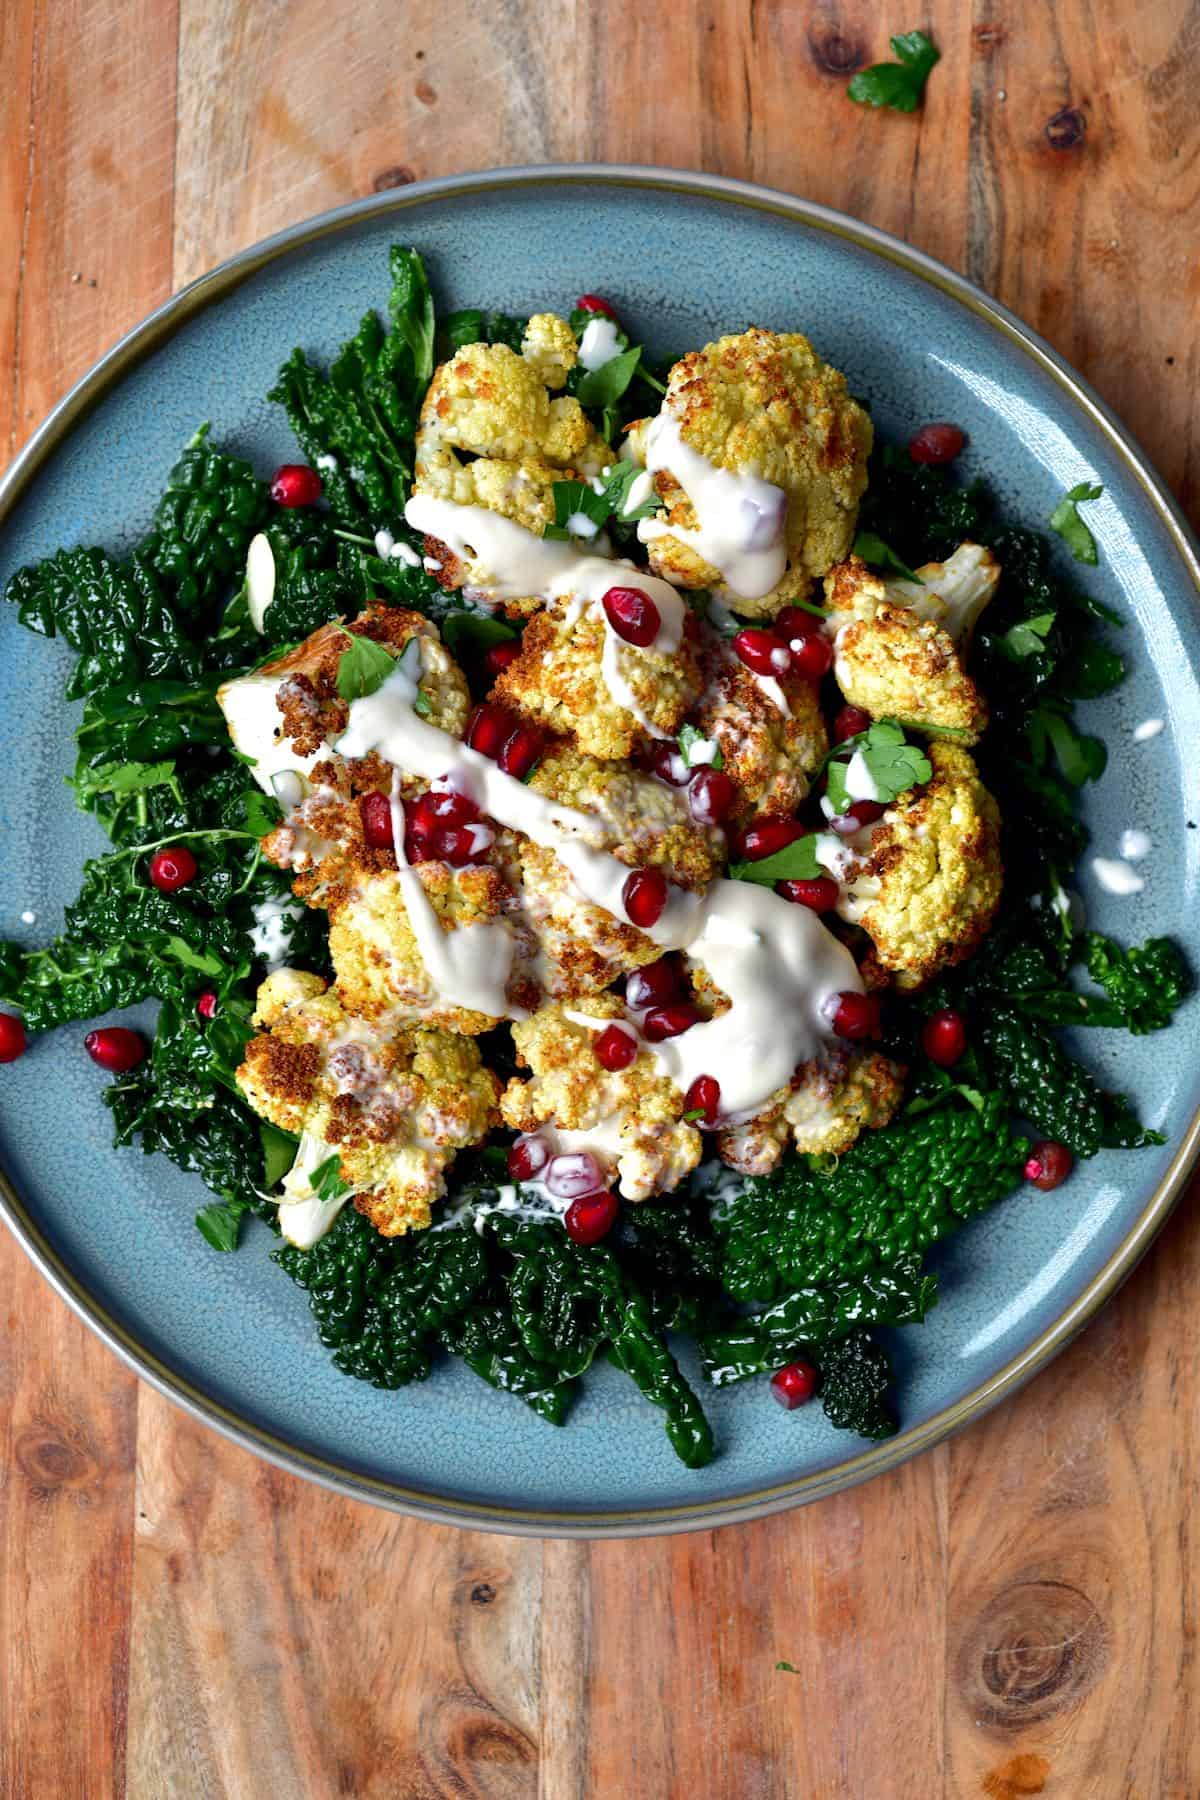 A serving of kale salad and baked cauliflower topped with pomegranate seeds and tahini sauce